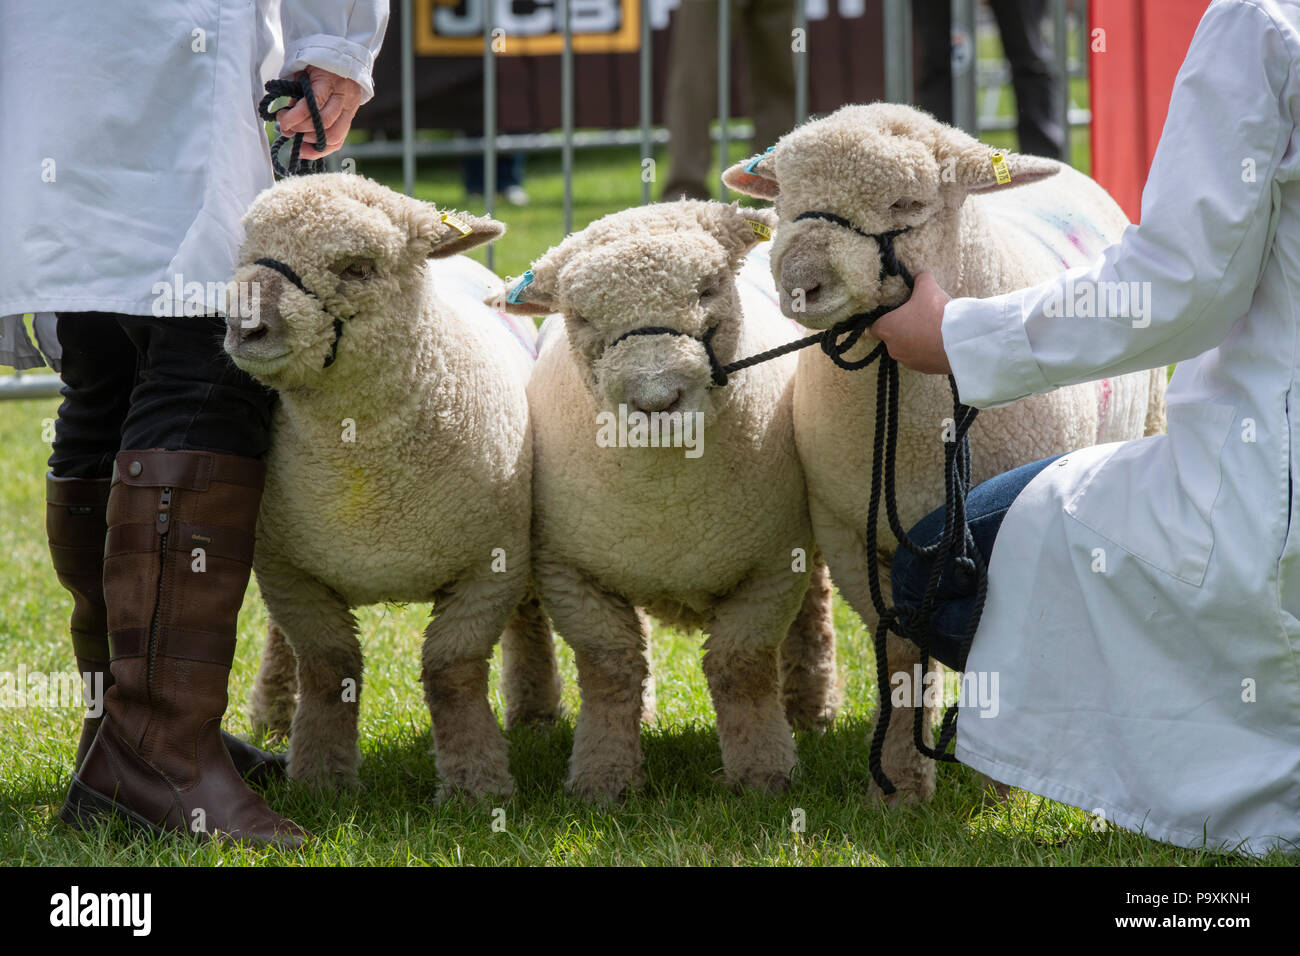 Ovis aries. Southdown sheep on show at an Agricultural show. UK Stock Photo